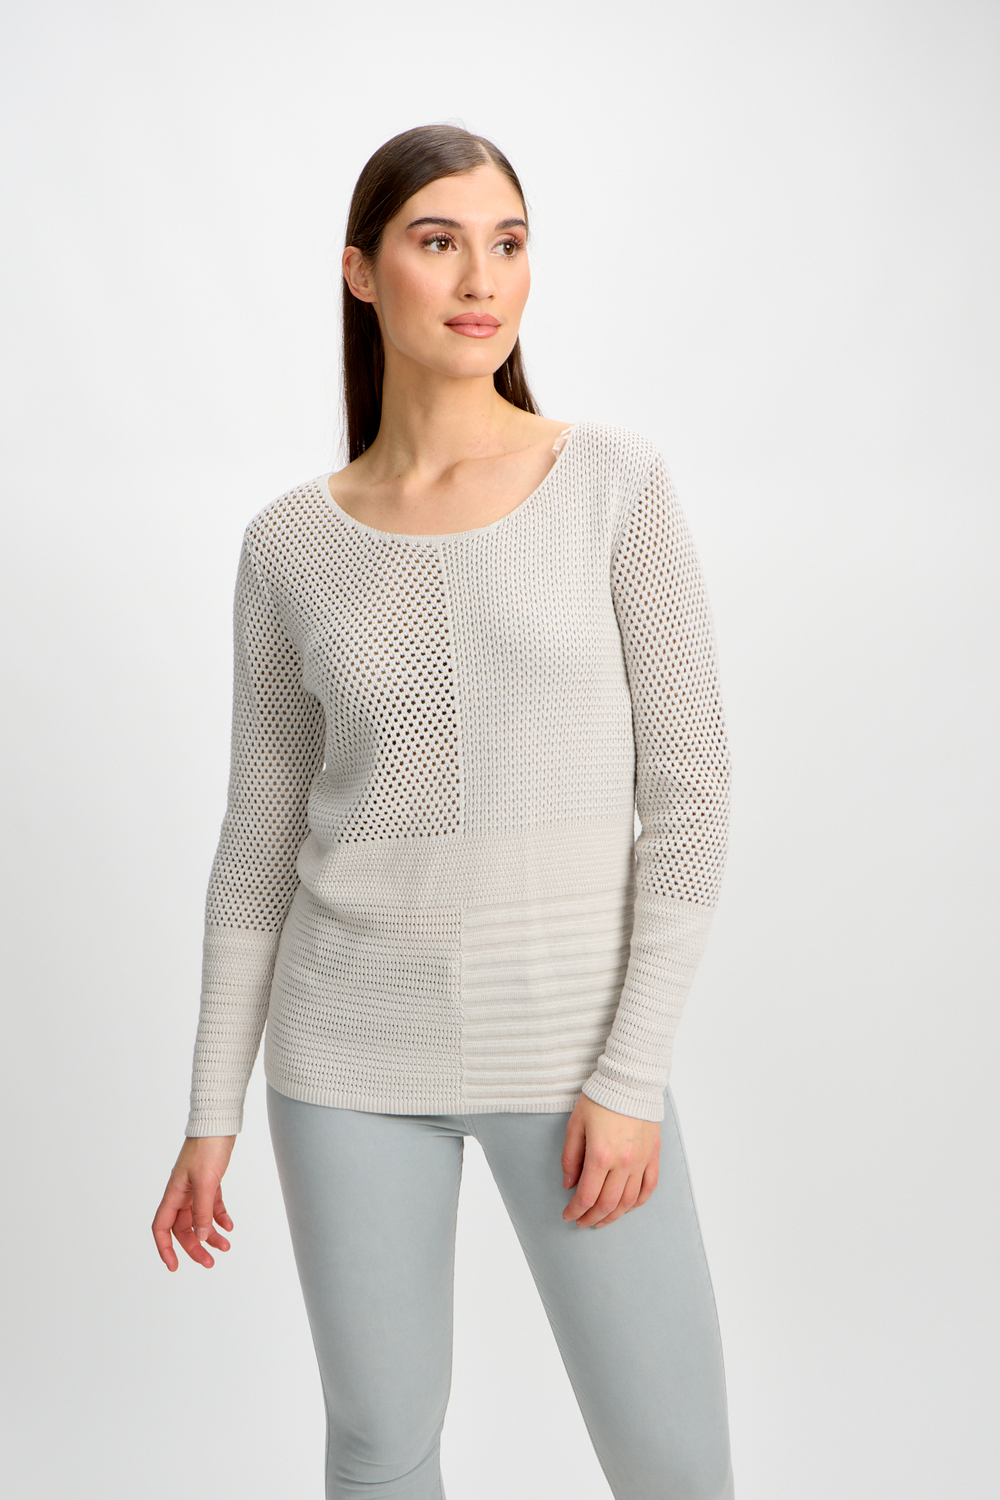 Round Neck Fitted Sweater Style 80305-6100. Linen